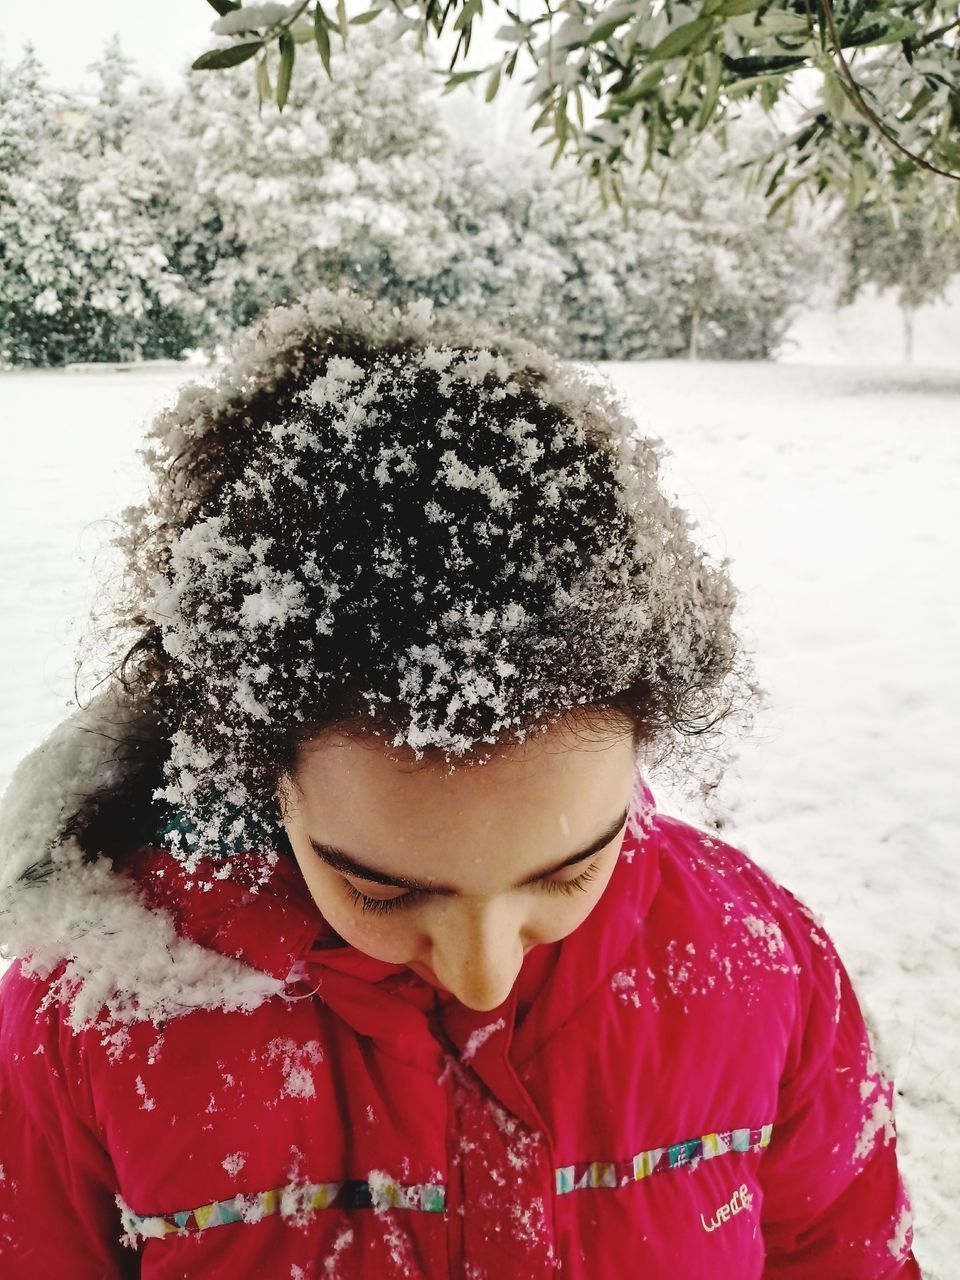 CLOSE-UP OF A GIRL WITH SNOW